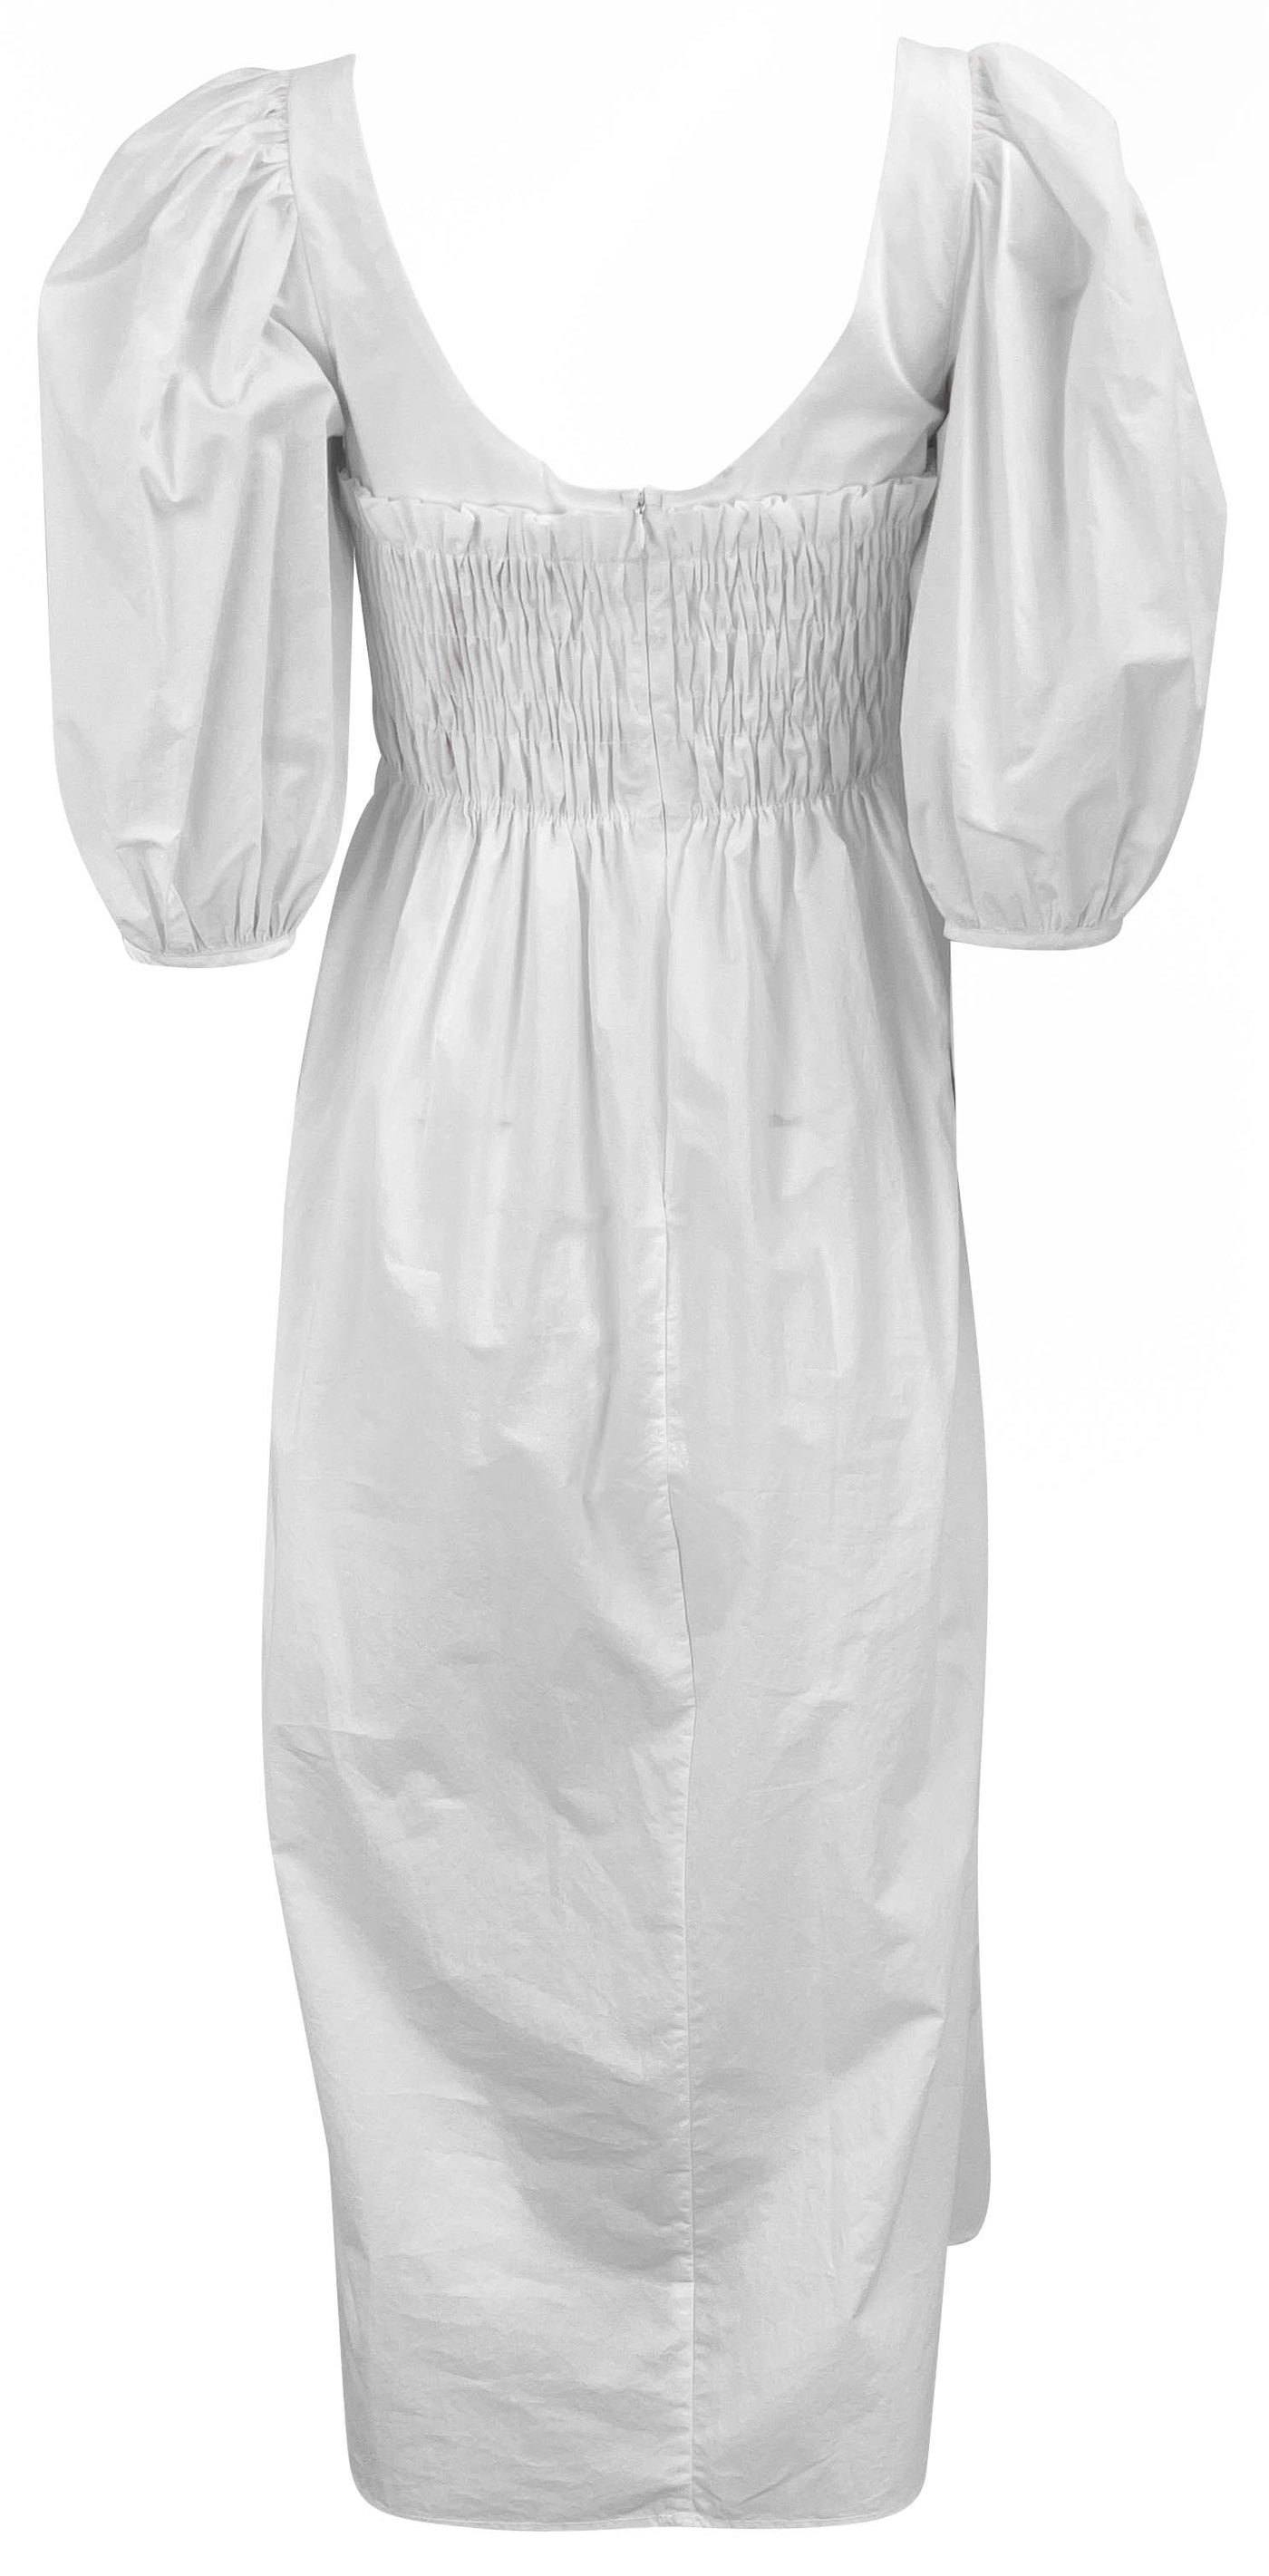 Ciao Lucia! Veneto Dress in White - Discounts on Ciao Lucia! at UAL